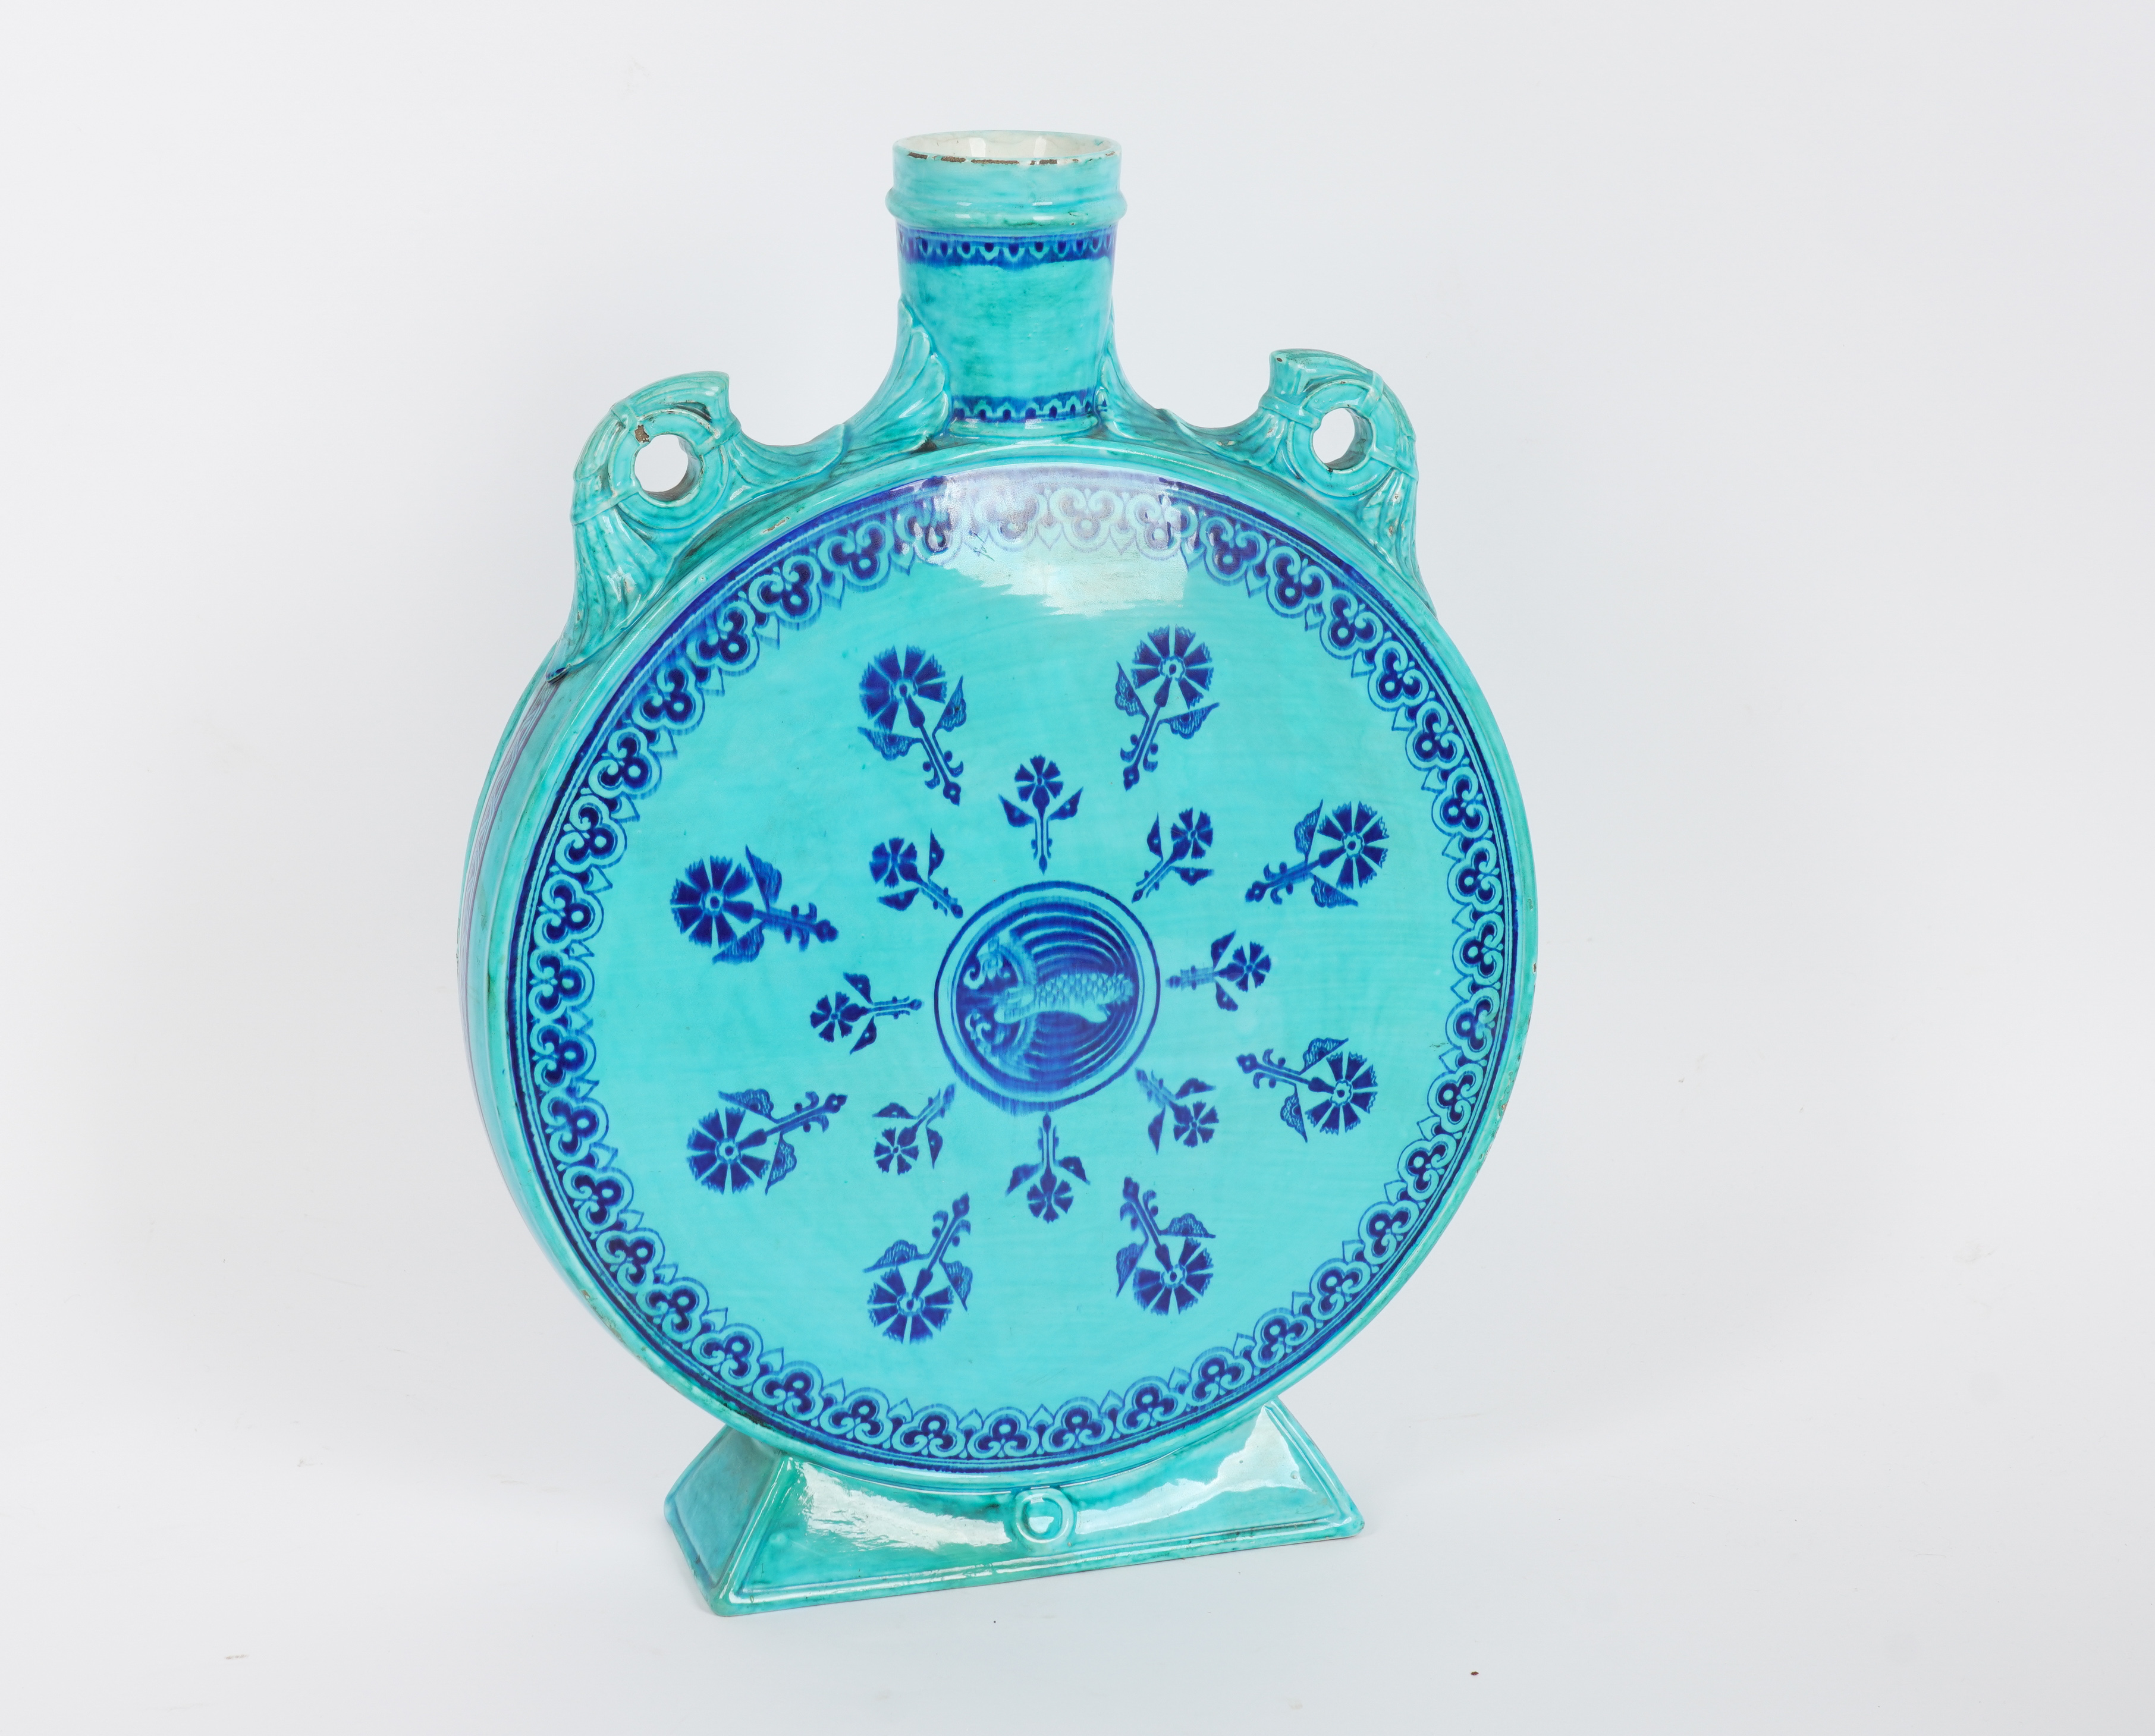 A LARGE MINTON TURQUOISE GROUND MOONFLASK ATTRIBUTED TO CHRISTOPHER DRESSER